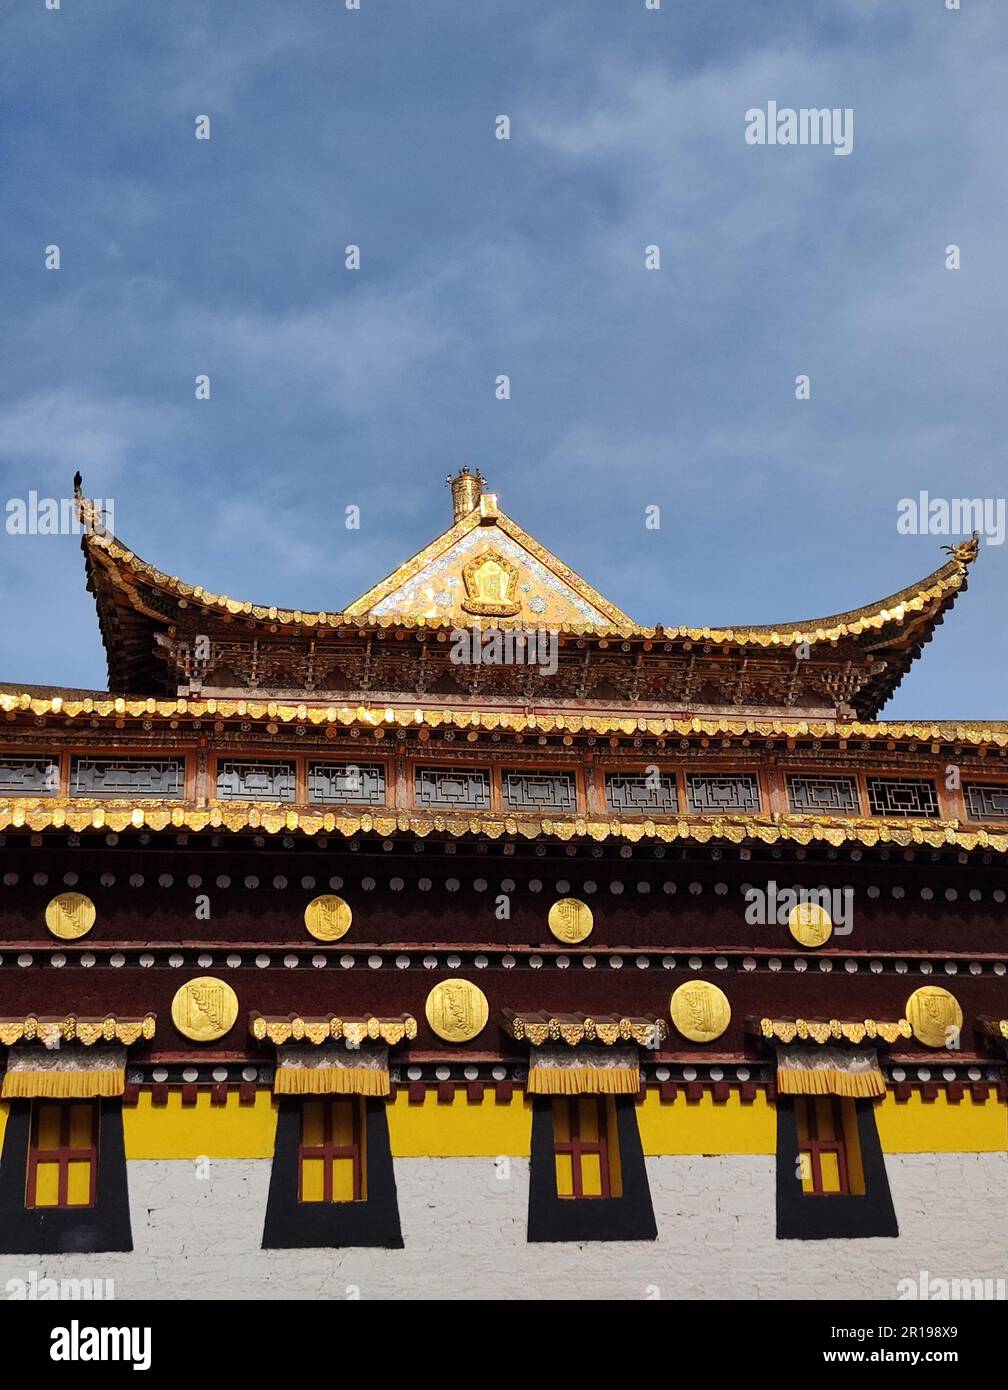 An architectural structure with a golden designs against a blue sky Stock Photo